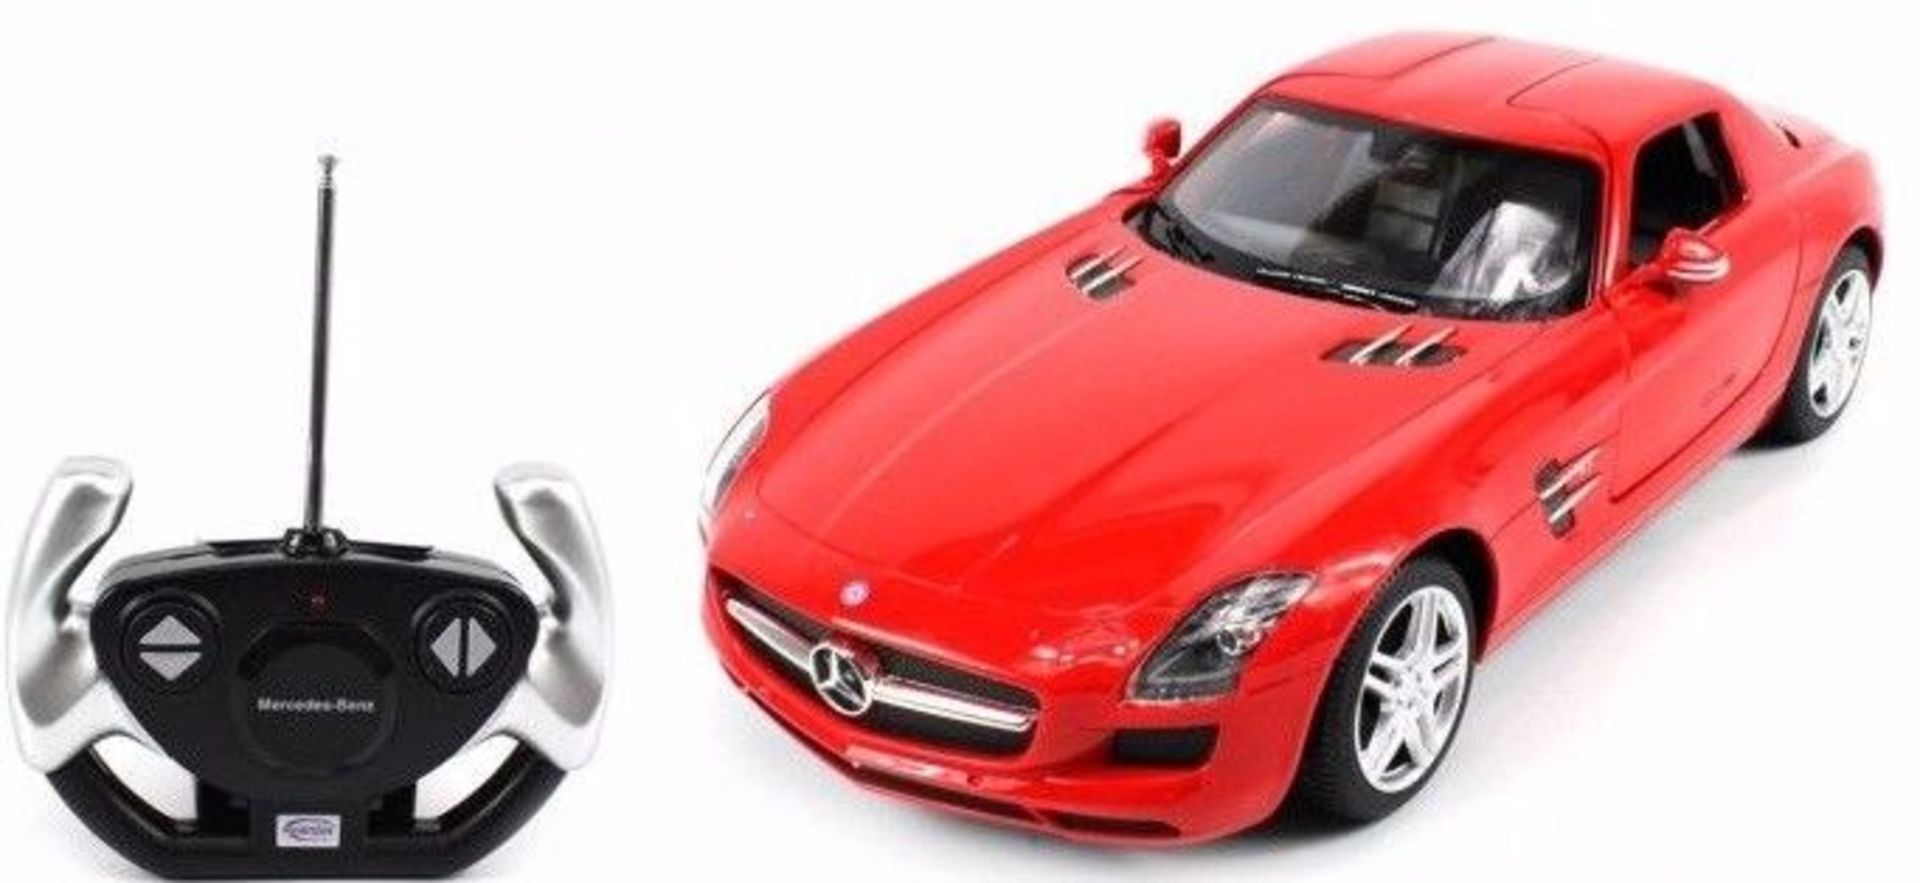 V *TRADE QTY* Brand New 1:10 Radio Controlled Red Mercedes-Benz SLS AMG X 4 YOUR BID PRICE TO BE